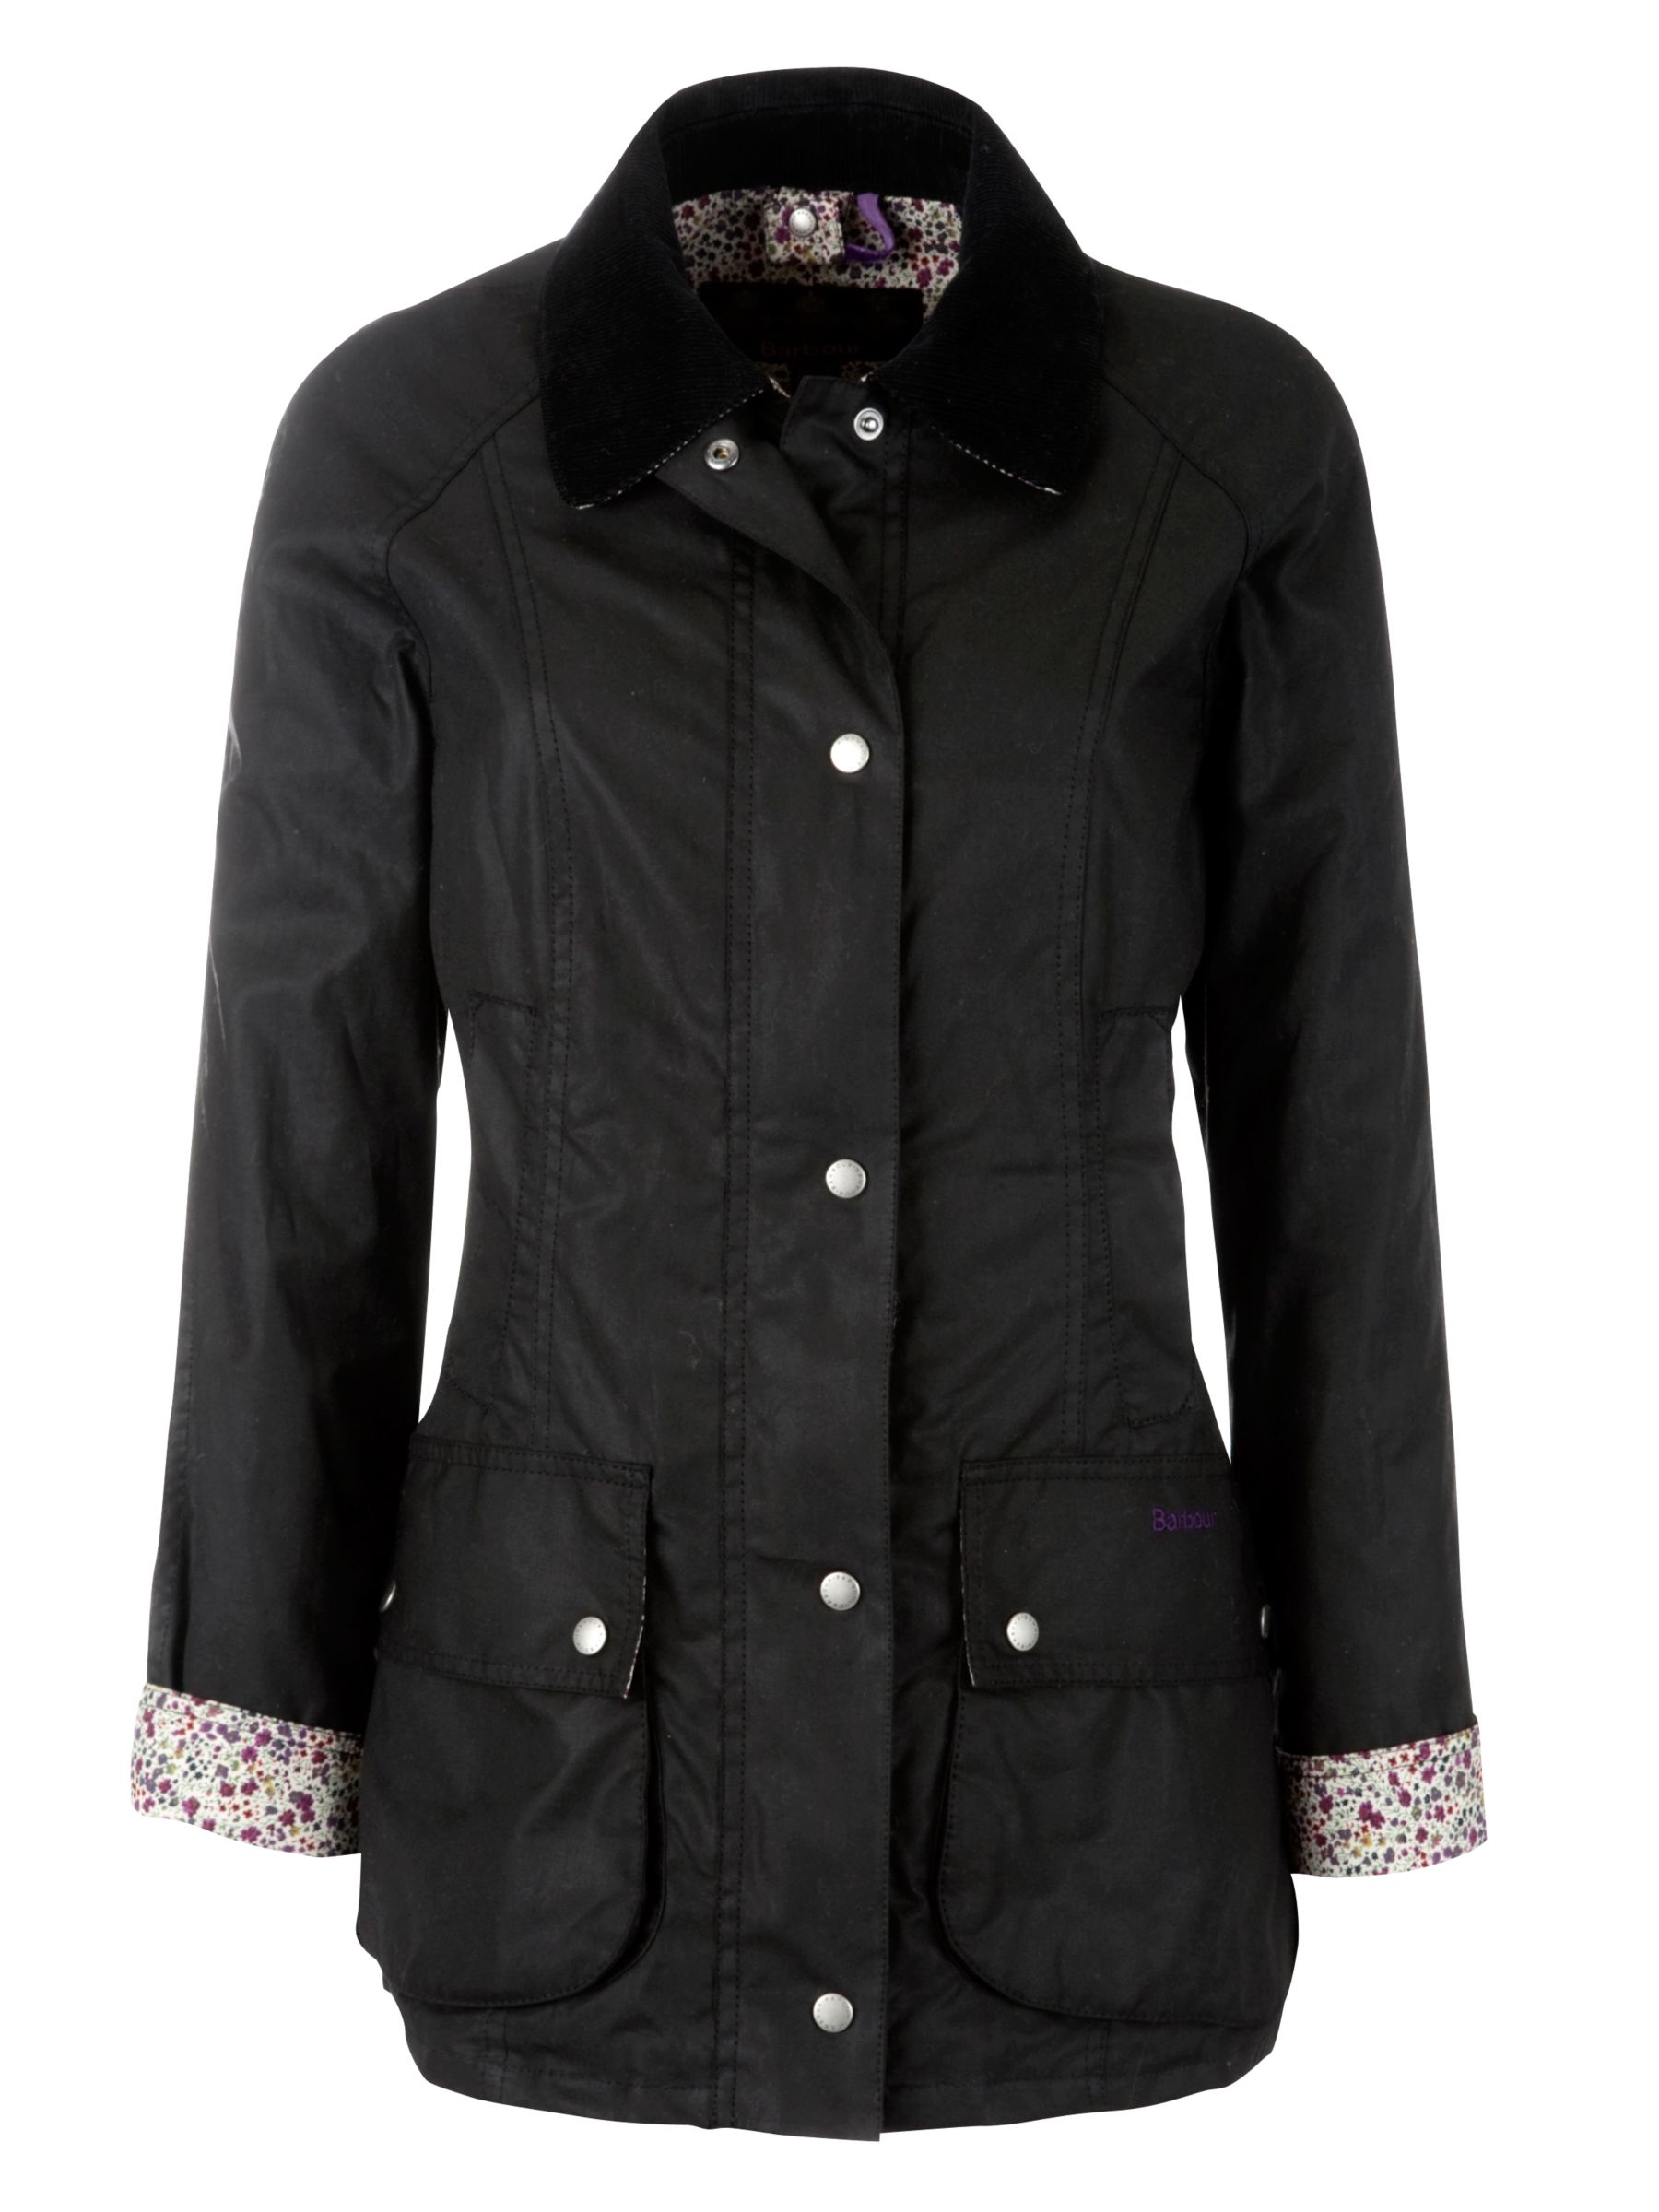 Barbour Liberty Beadnell Waxed Jacket at John Lewis & Partners